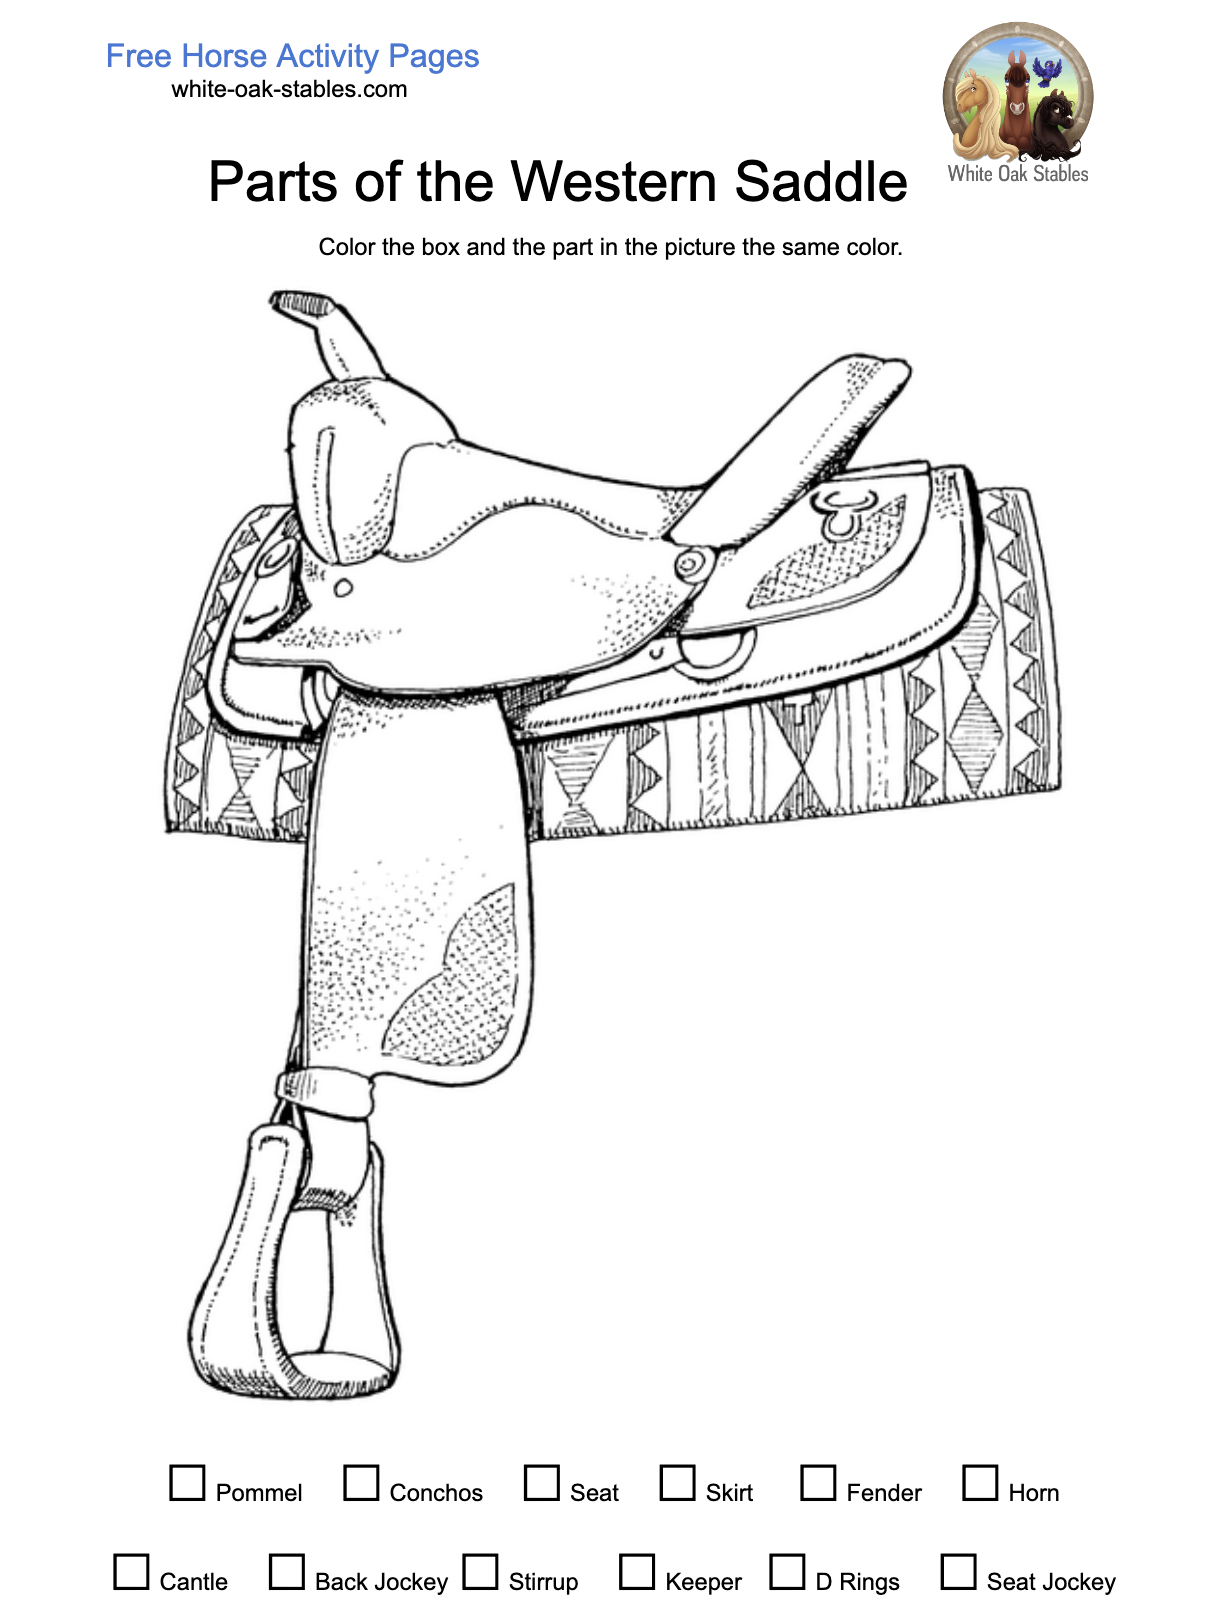 Color the Western Saddle